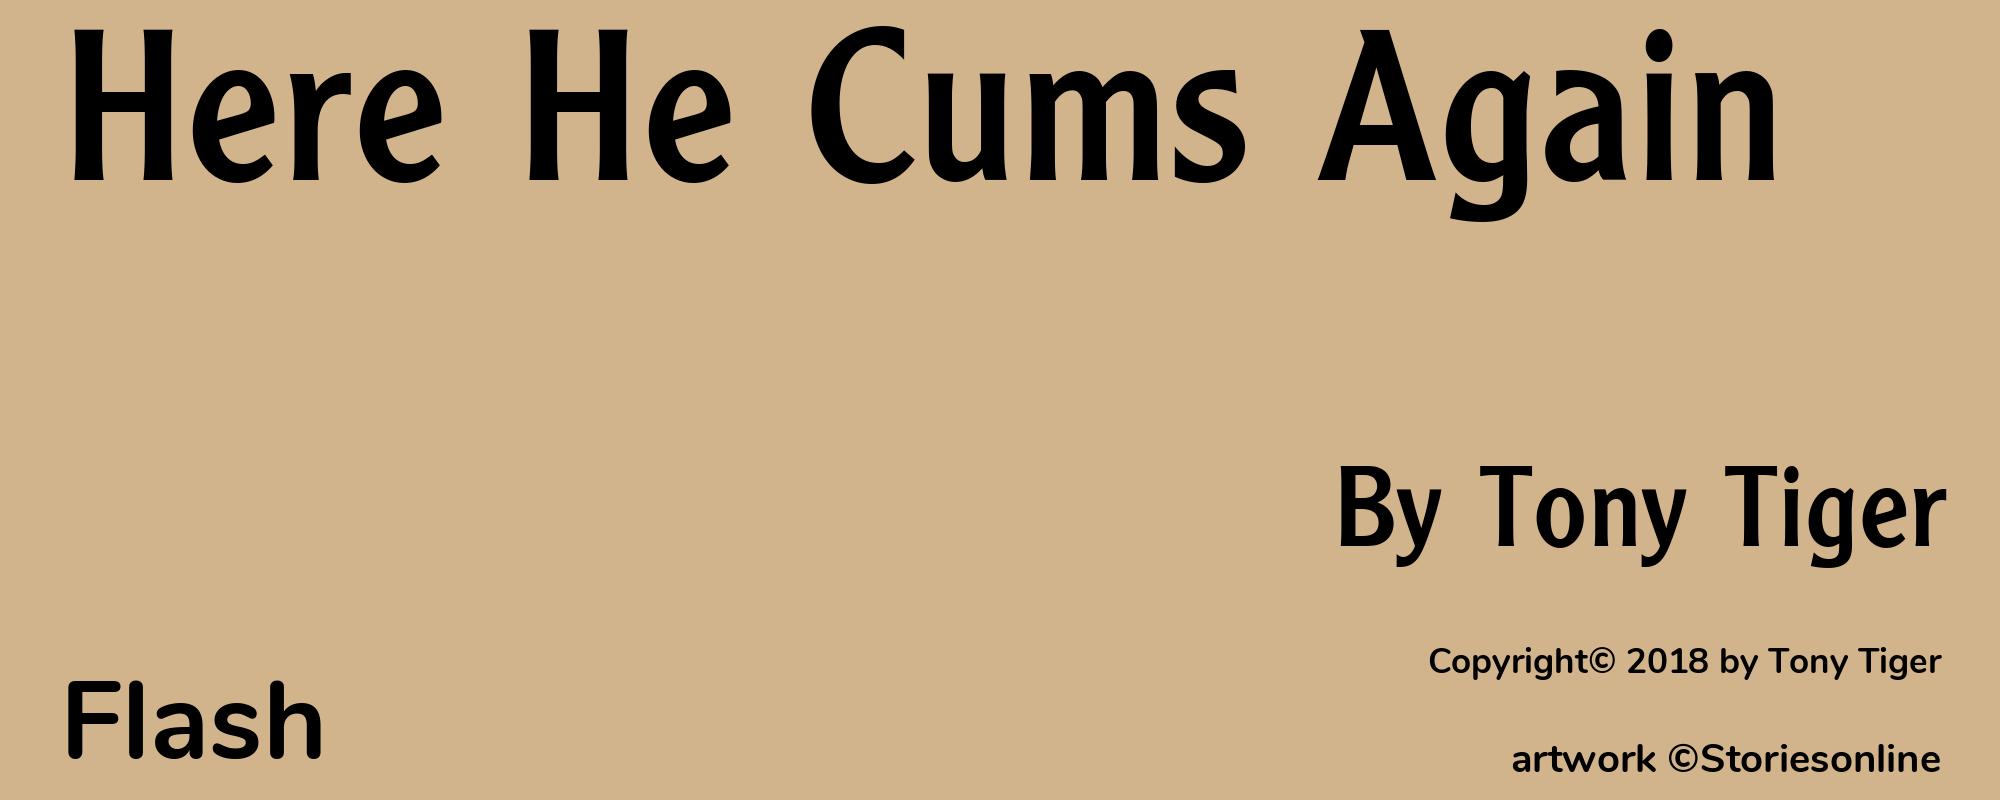 Here He Cums Again - Cover